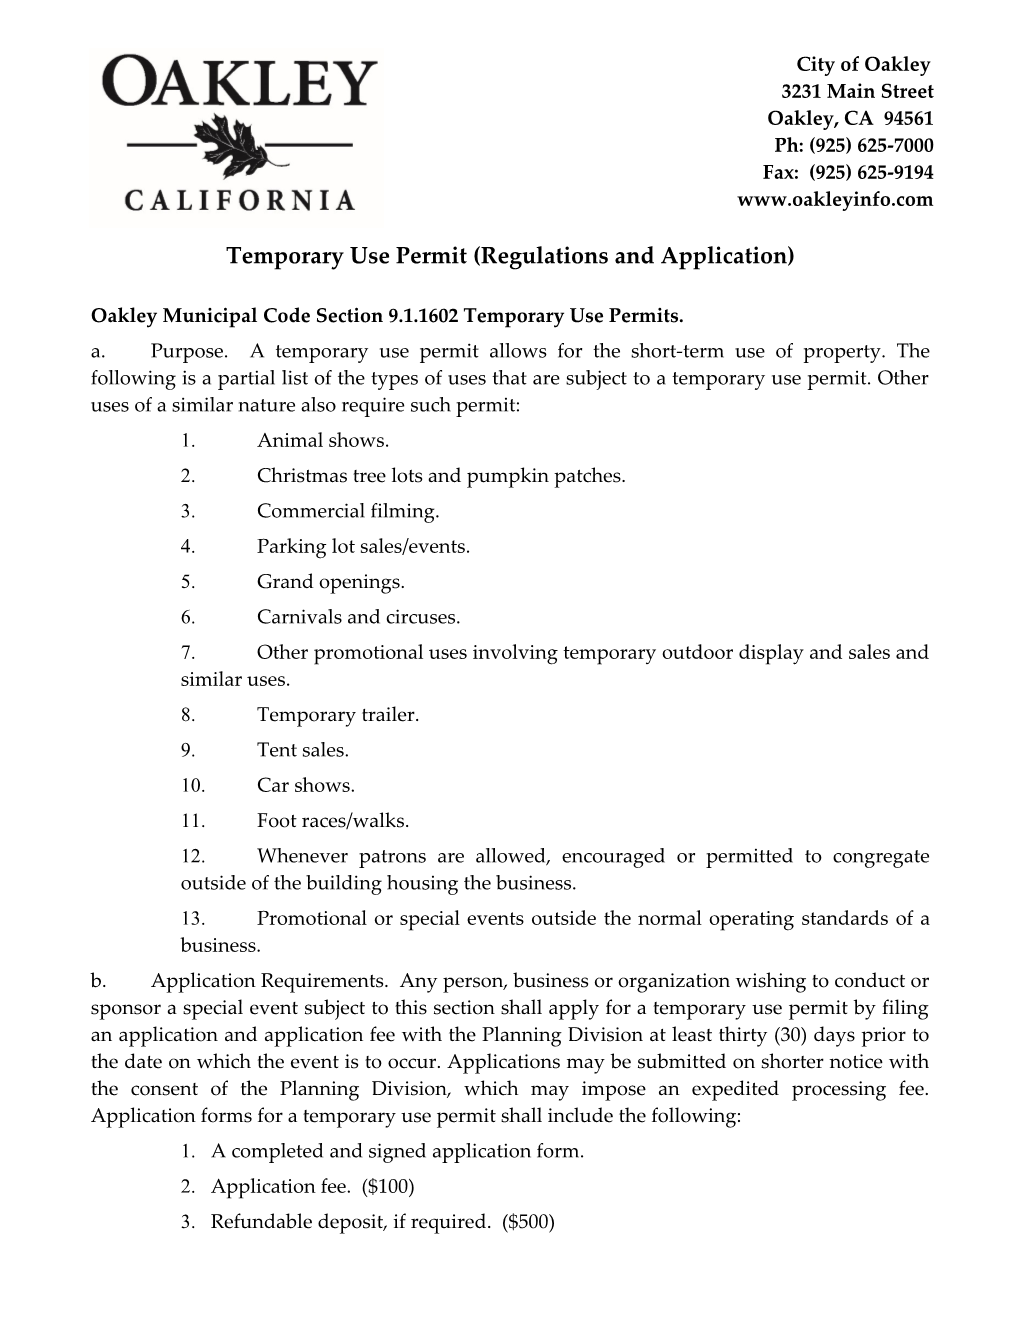 Temporary Use Permit (Regulations and Application)